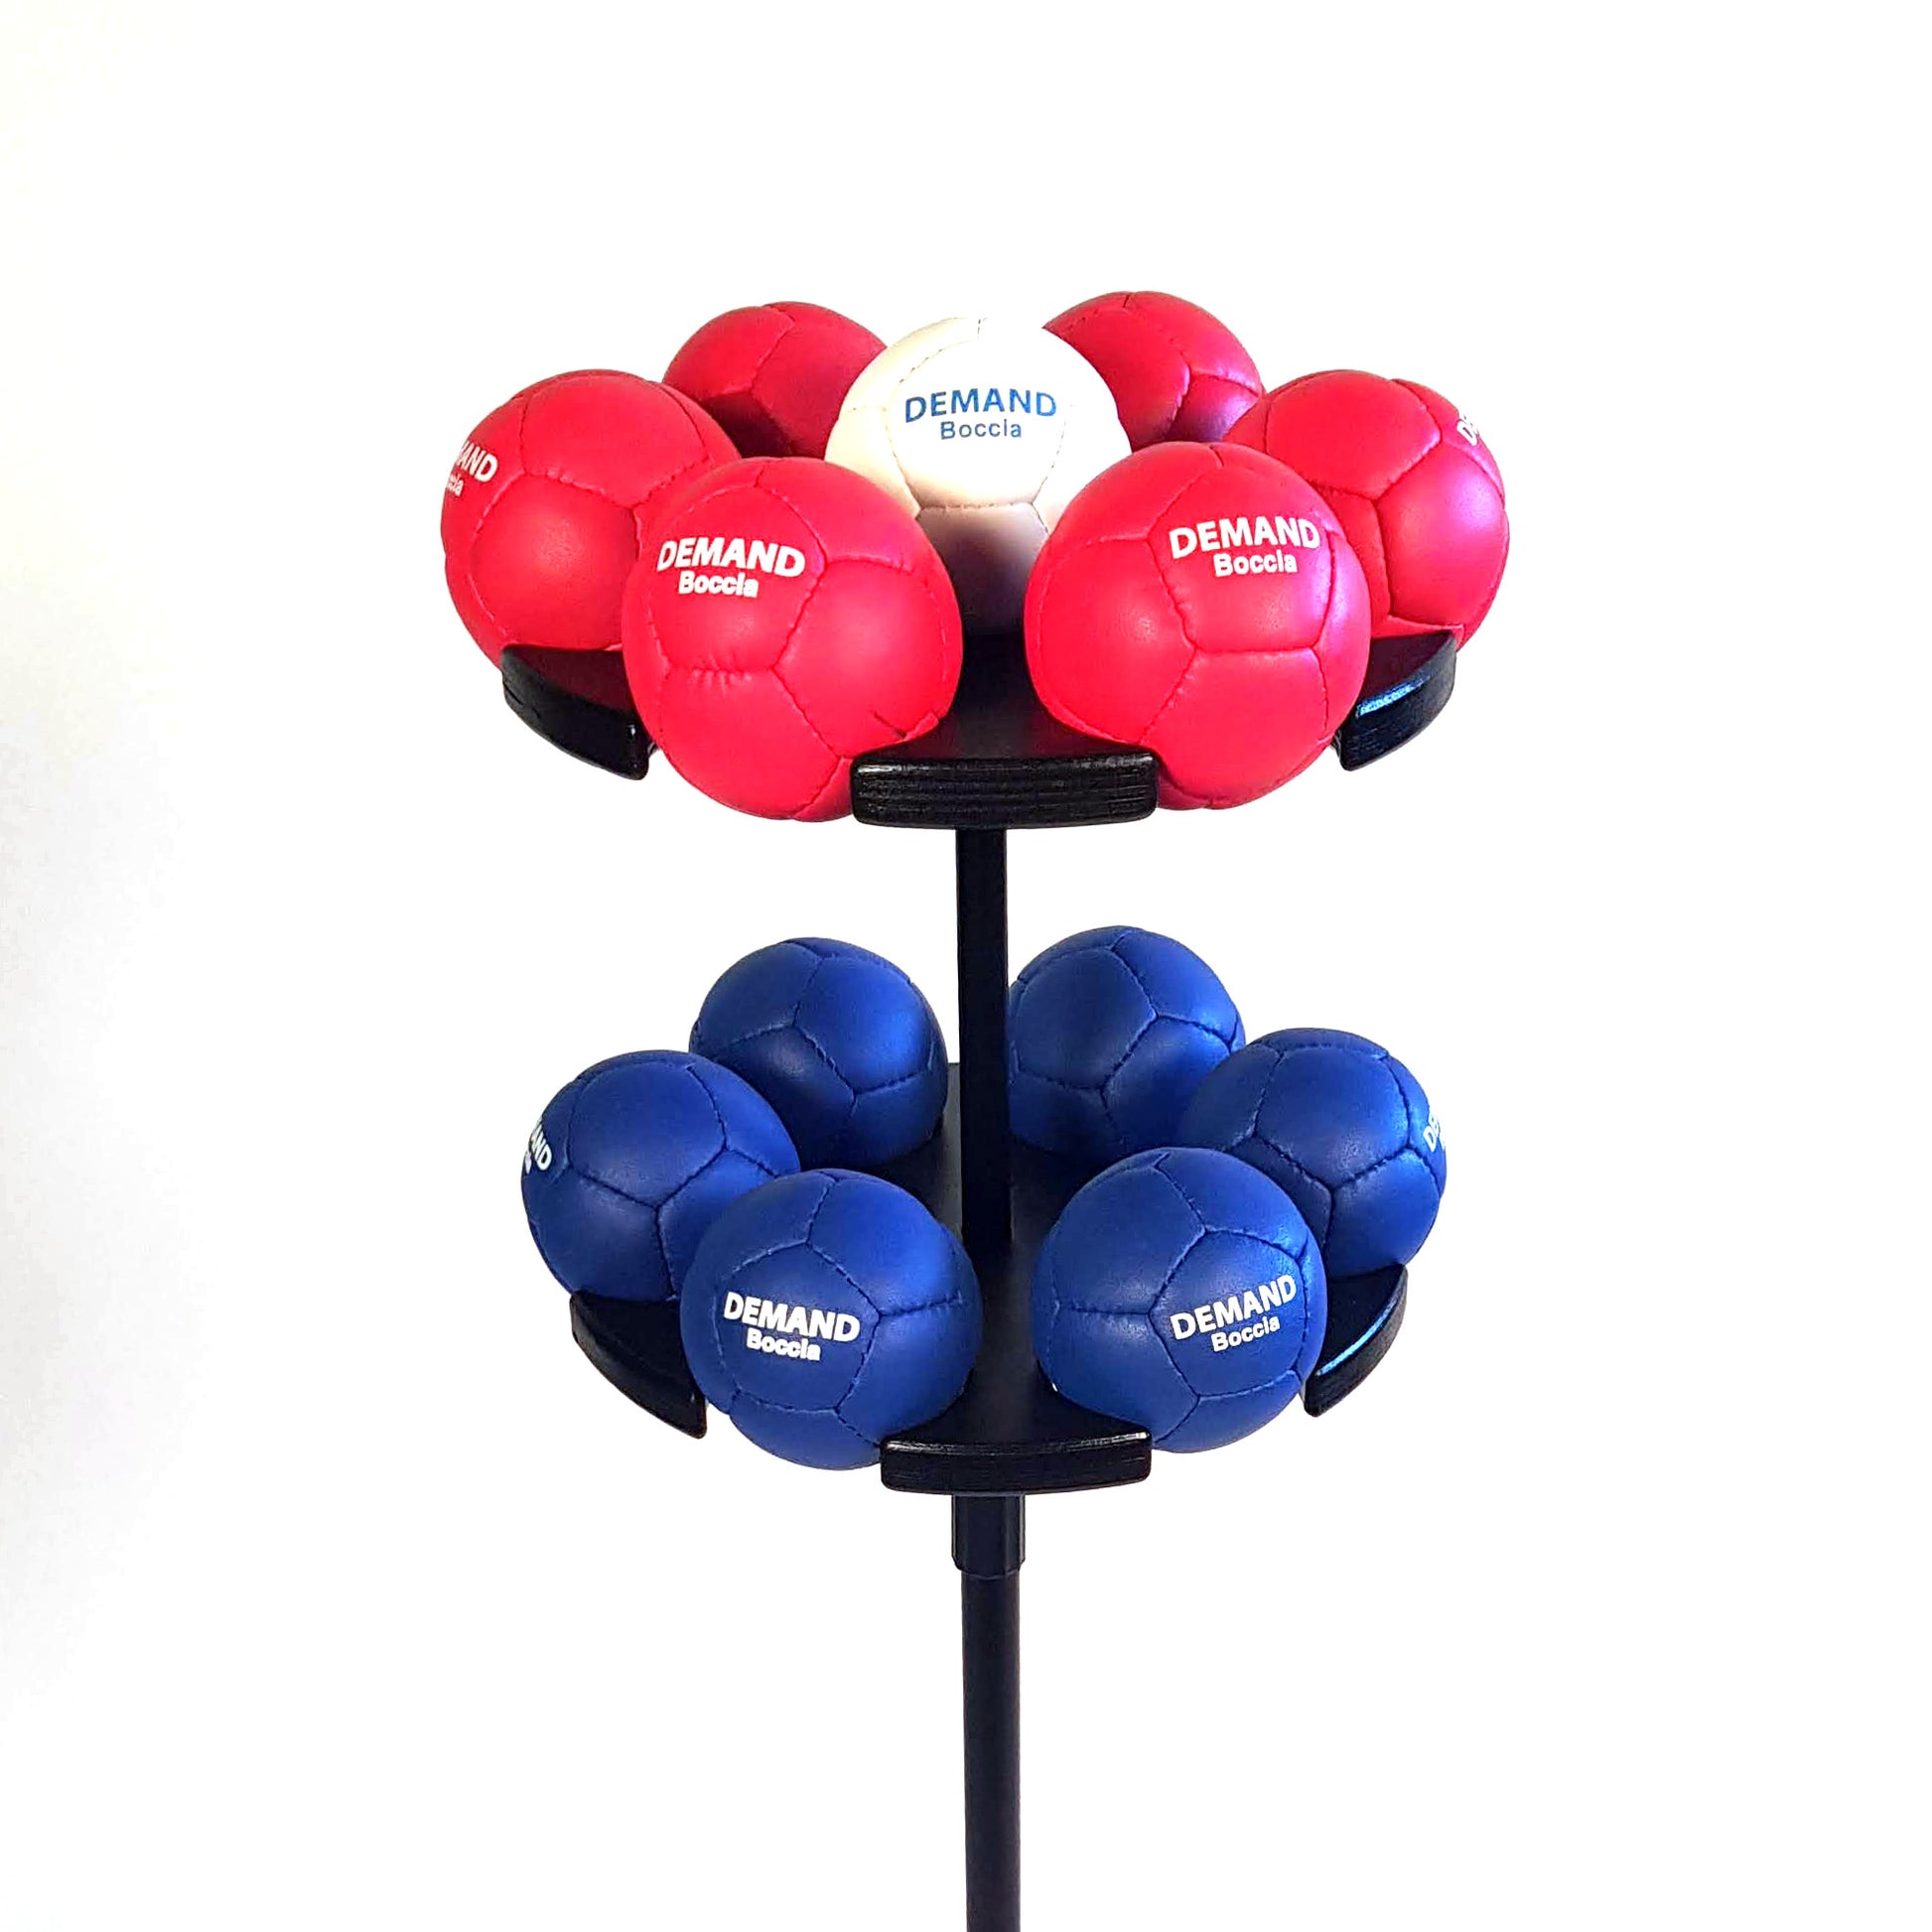 Close up view of DEMAND boccia ball stand with red blue and white boccia balls 